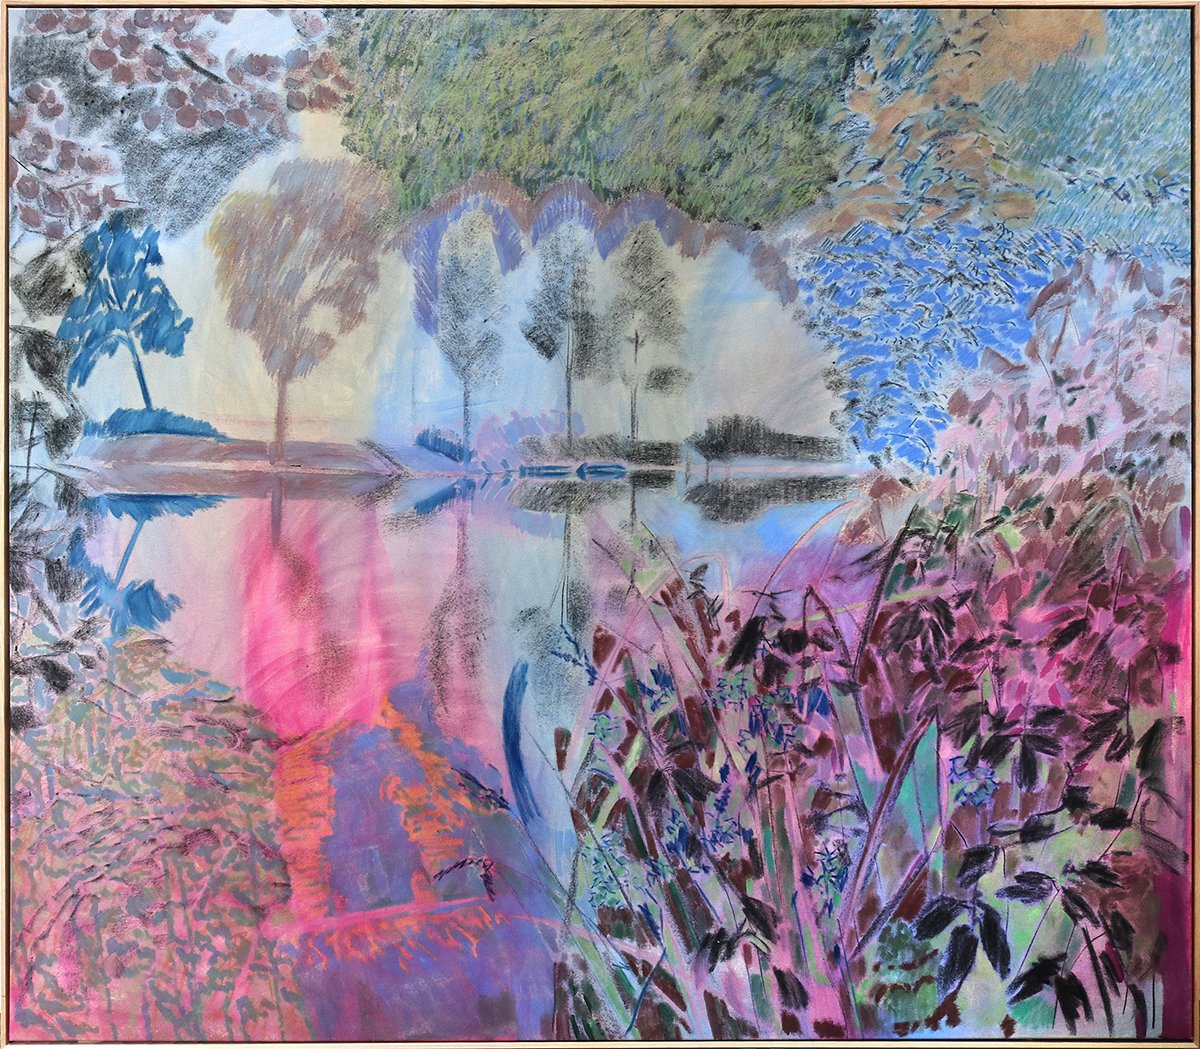  Reflections. A Memory. Acrylic, soft pastel and charcoal on canvas, 198cm H x 174cm W x 5cm D. 2022 